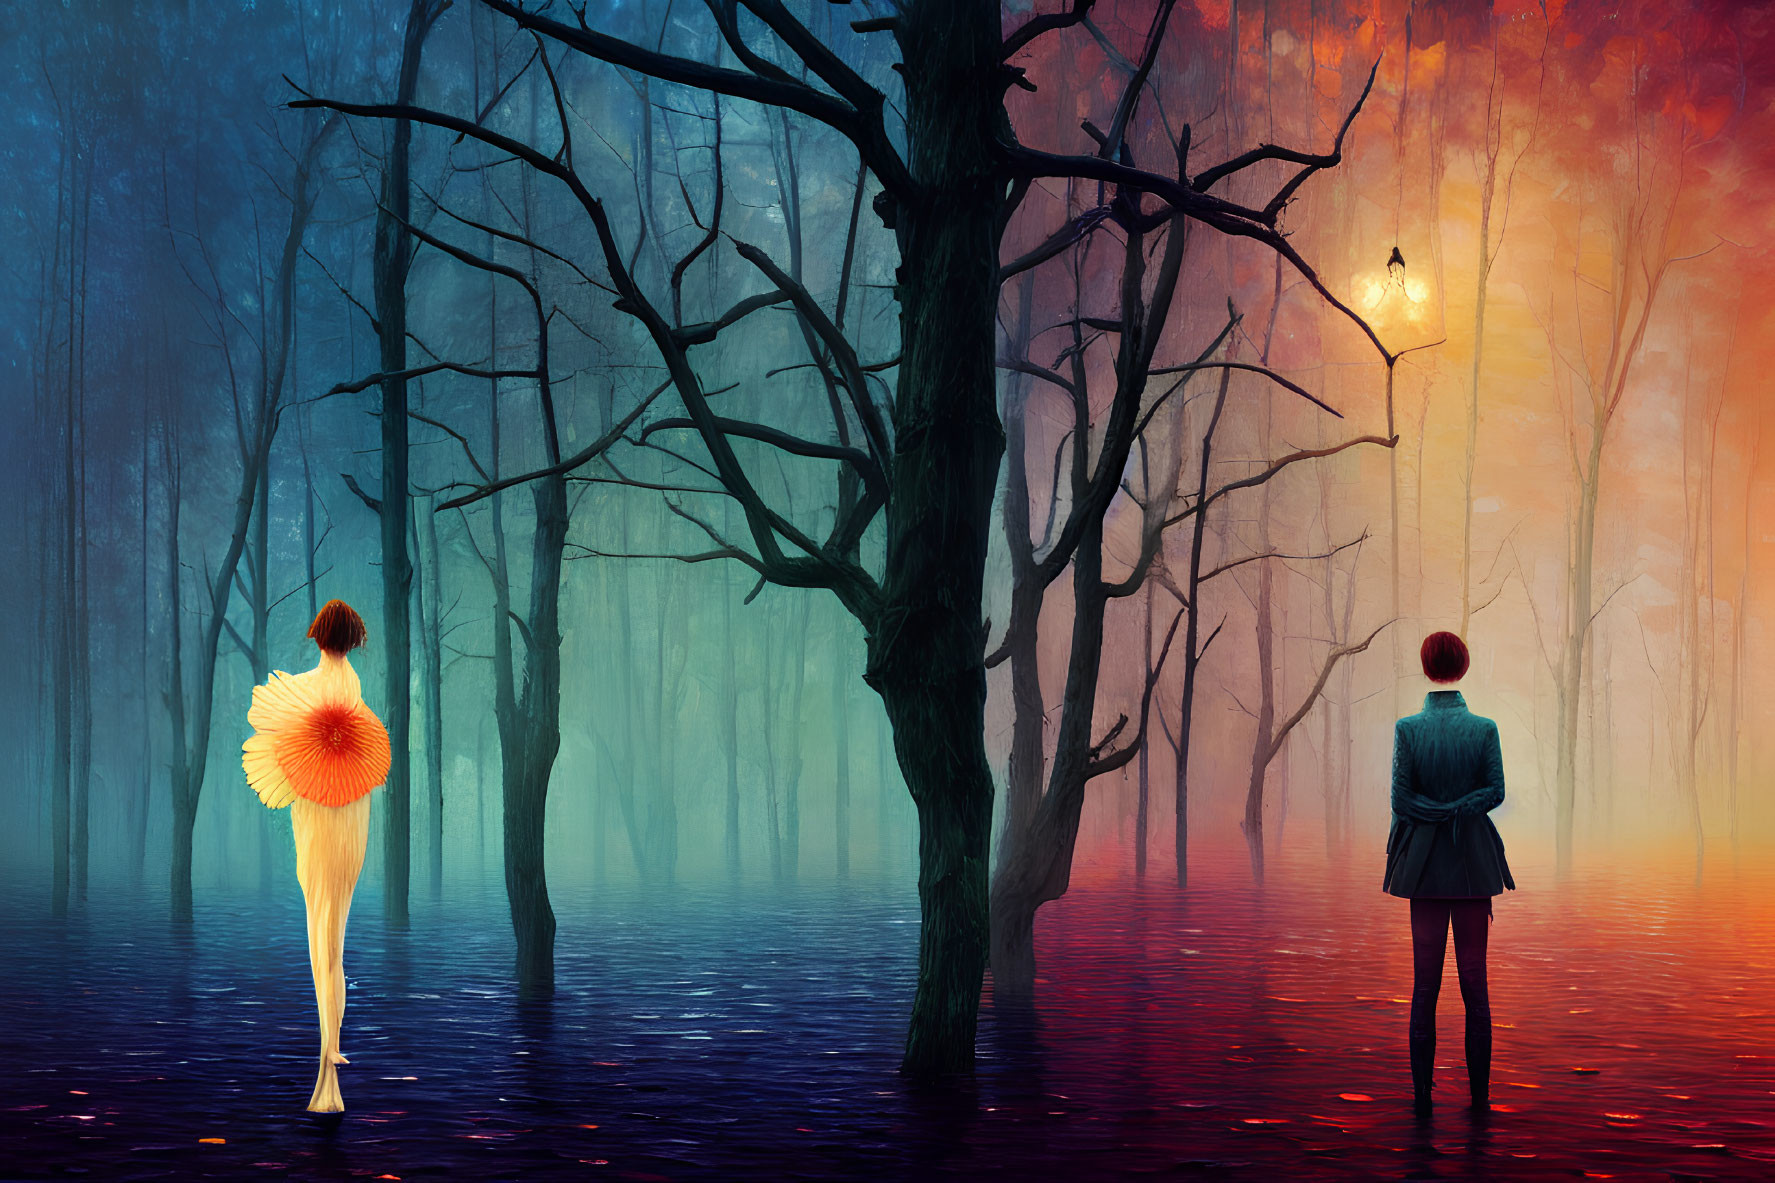 Vibrant surreal forest scene with two figures and lantern by reflective water